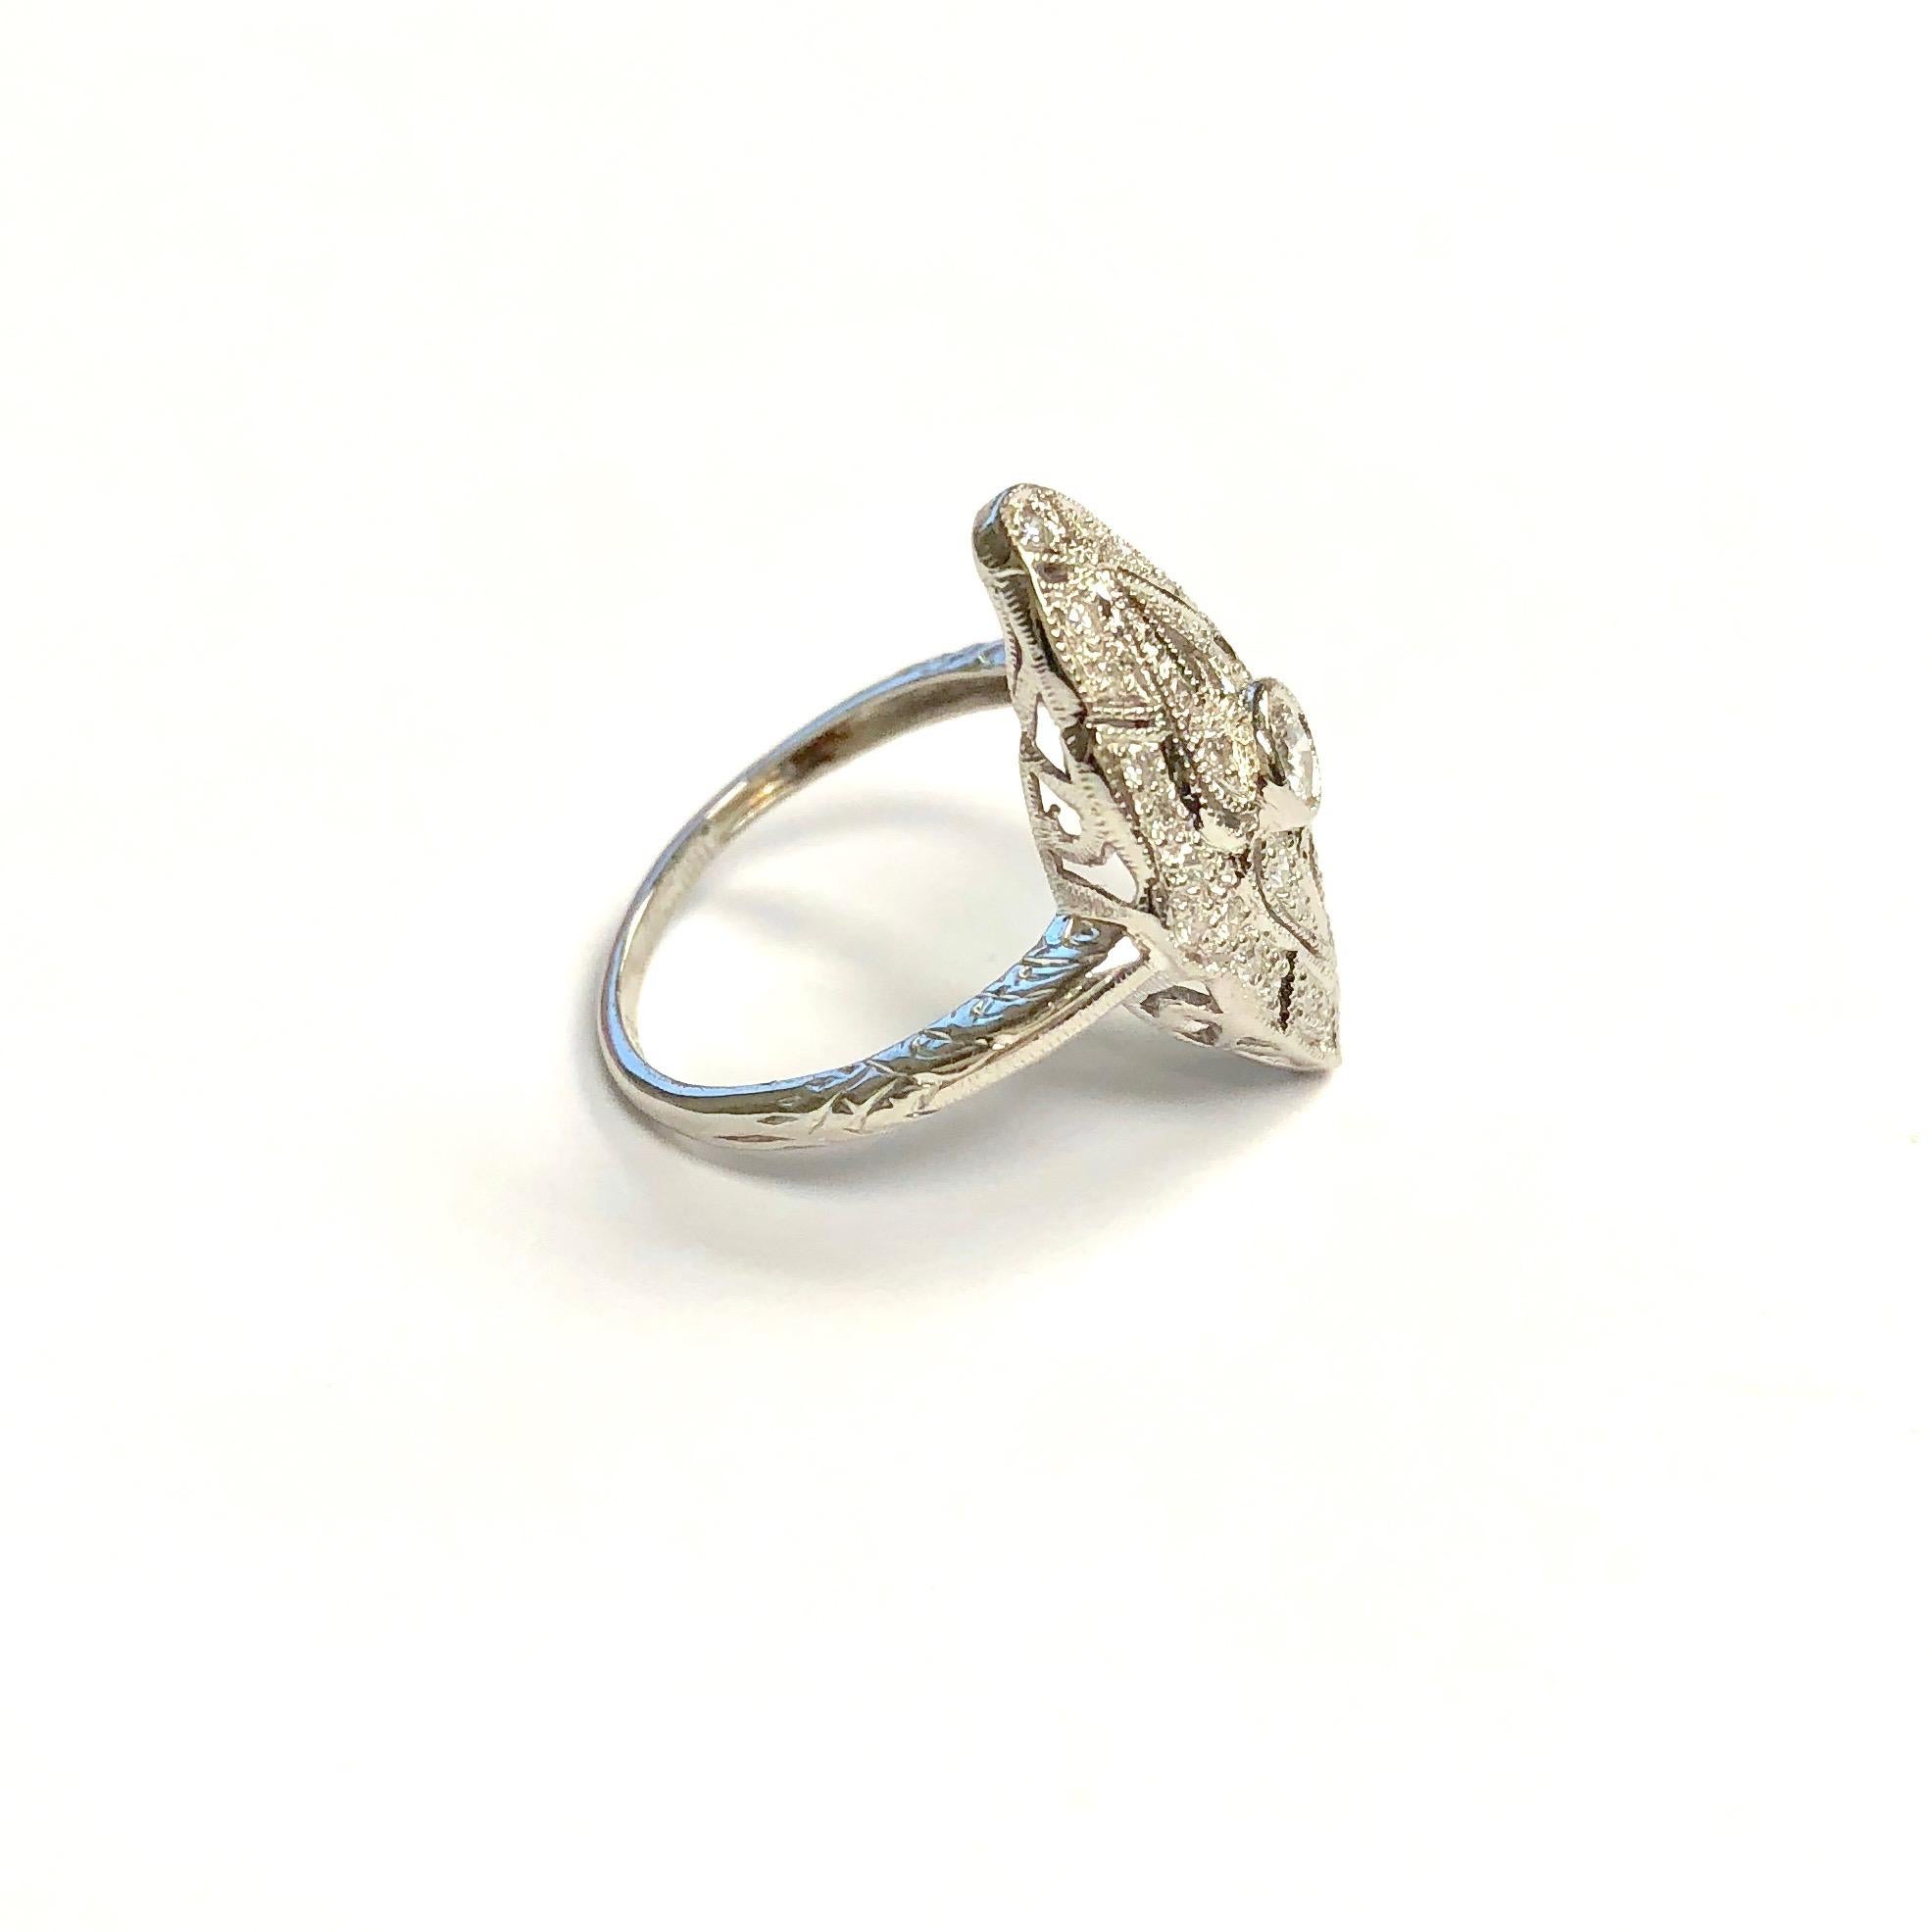 Classic platinum and diamond ring, featuring a navette shaped open-work design with milgrain edges, supported by hand engraved shoulders and a one and a half millimeter wide band. Forty-one round brilliant cut diamonds with 0.36 carat total weight